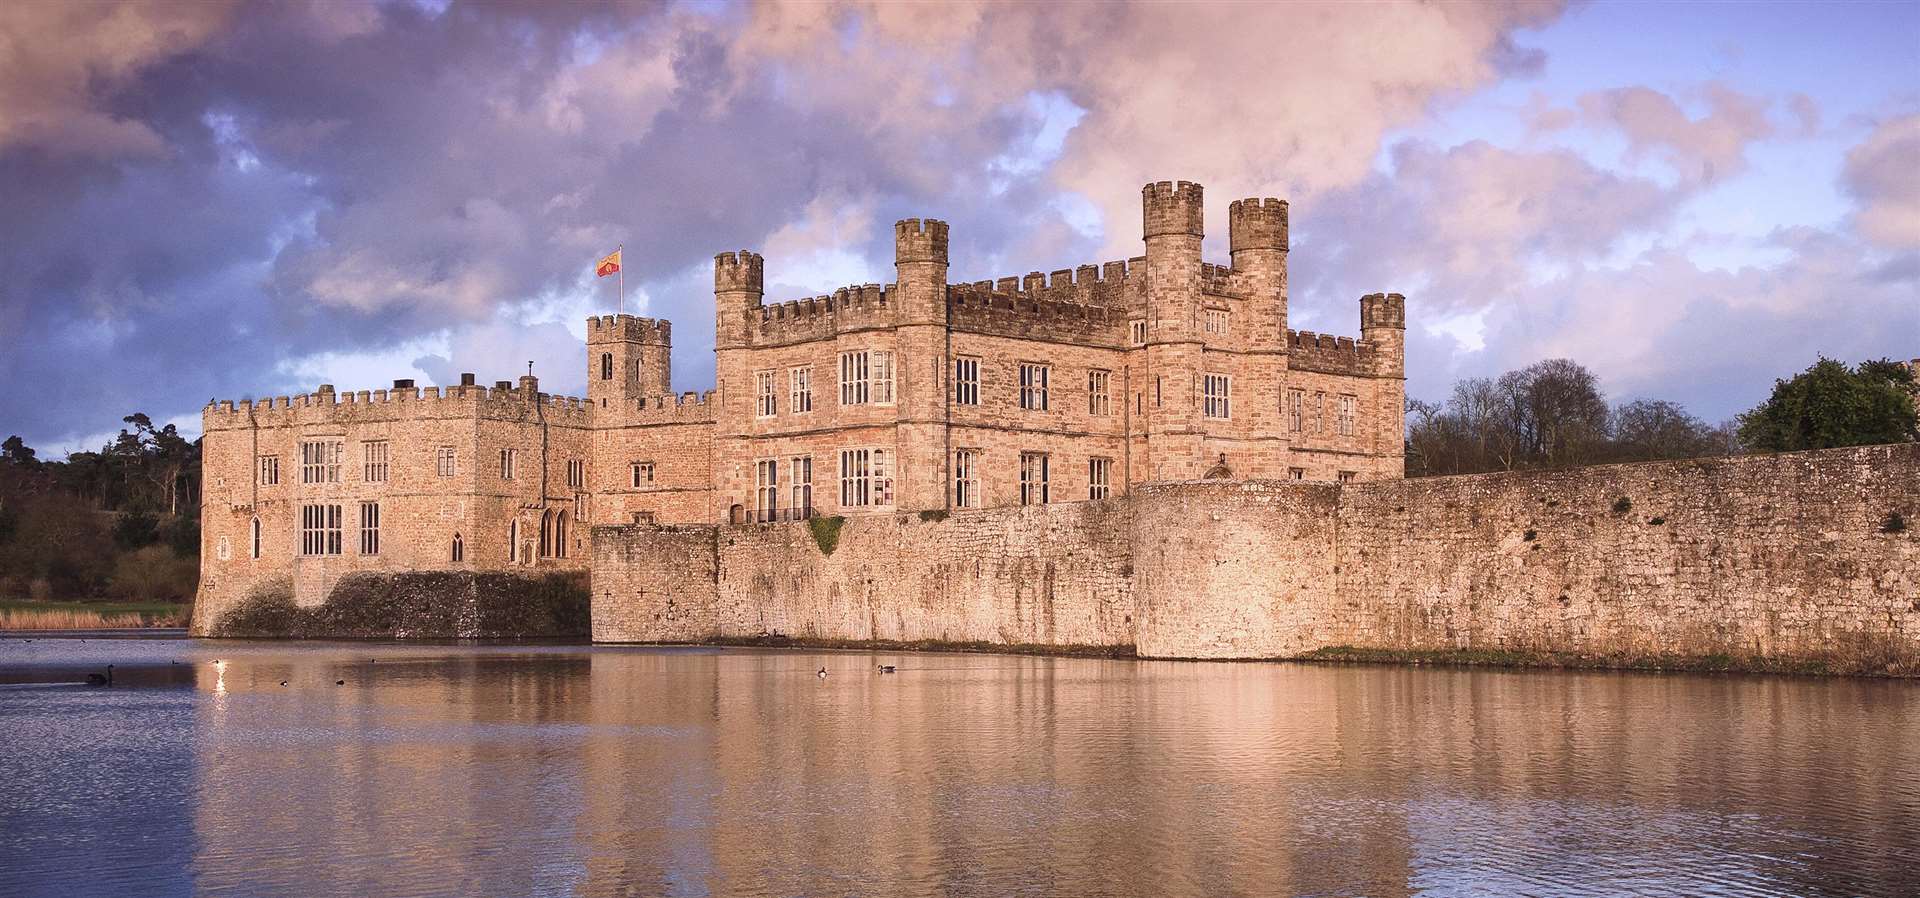 Leeds Castle will feature in Danny Dyer’s Right Royal Family. Picture: Visit Kent